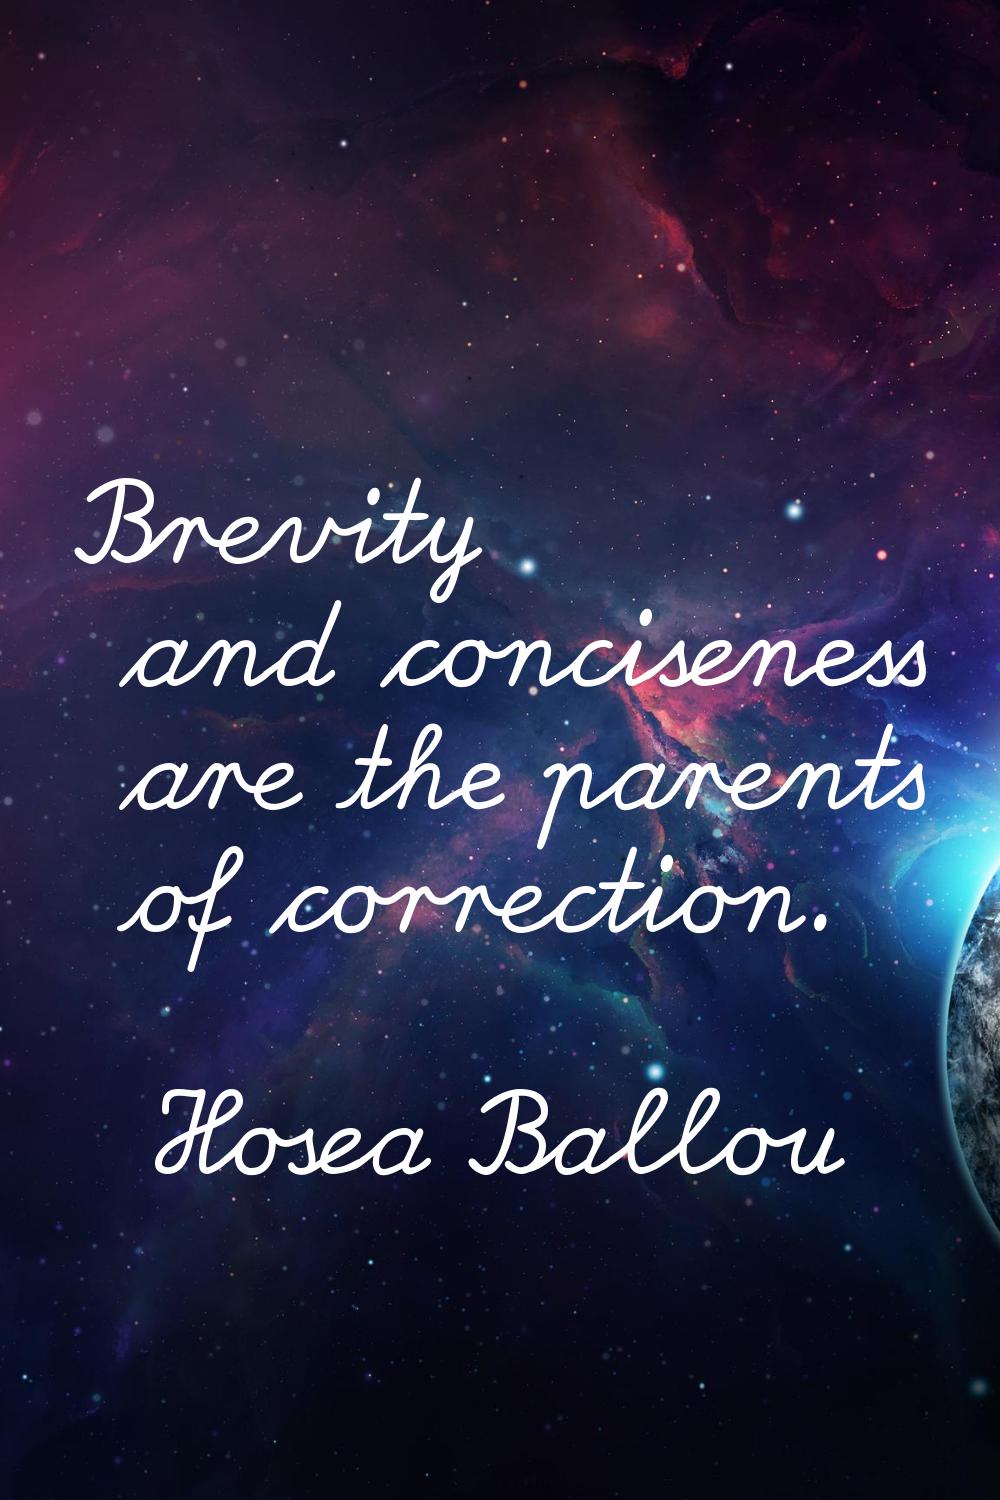 Brevity and conciseness are the parents of correction.